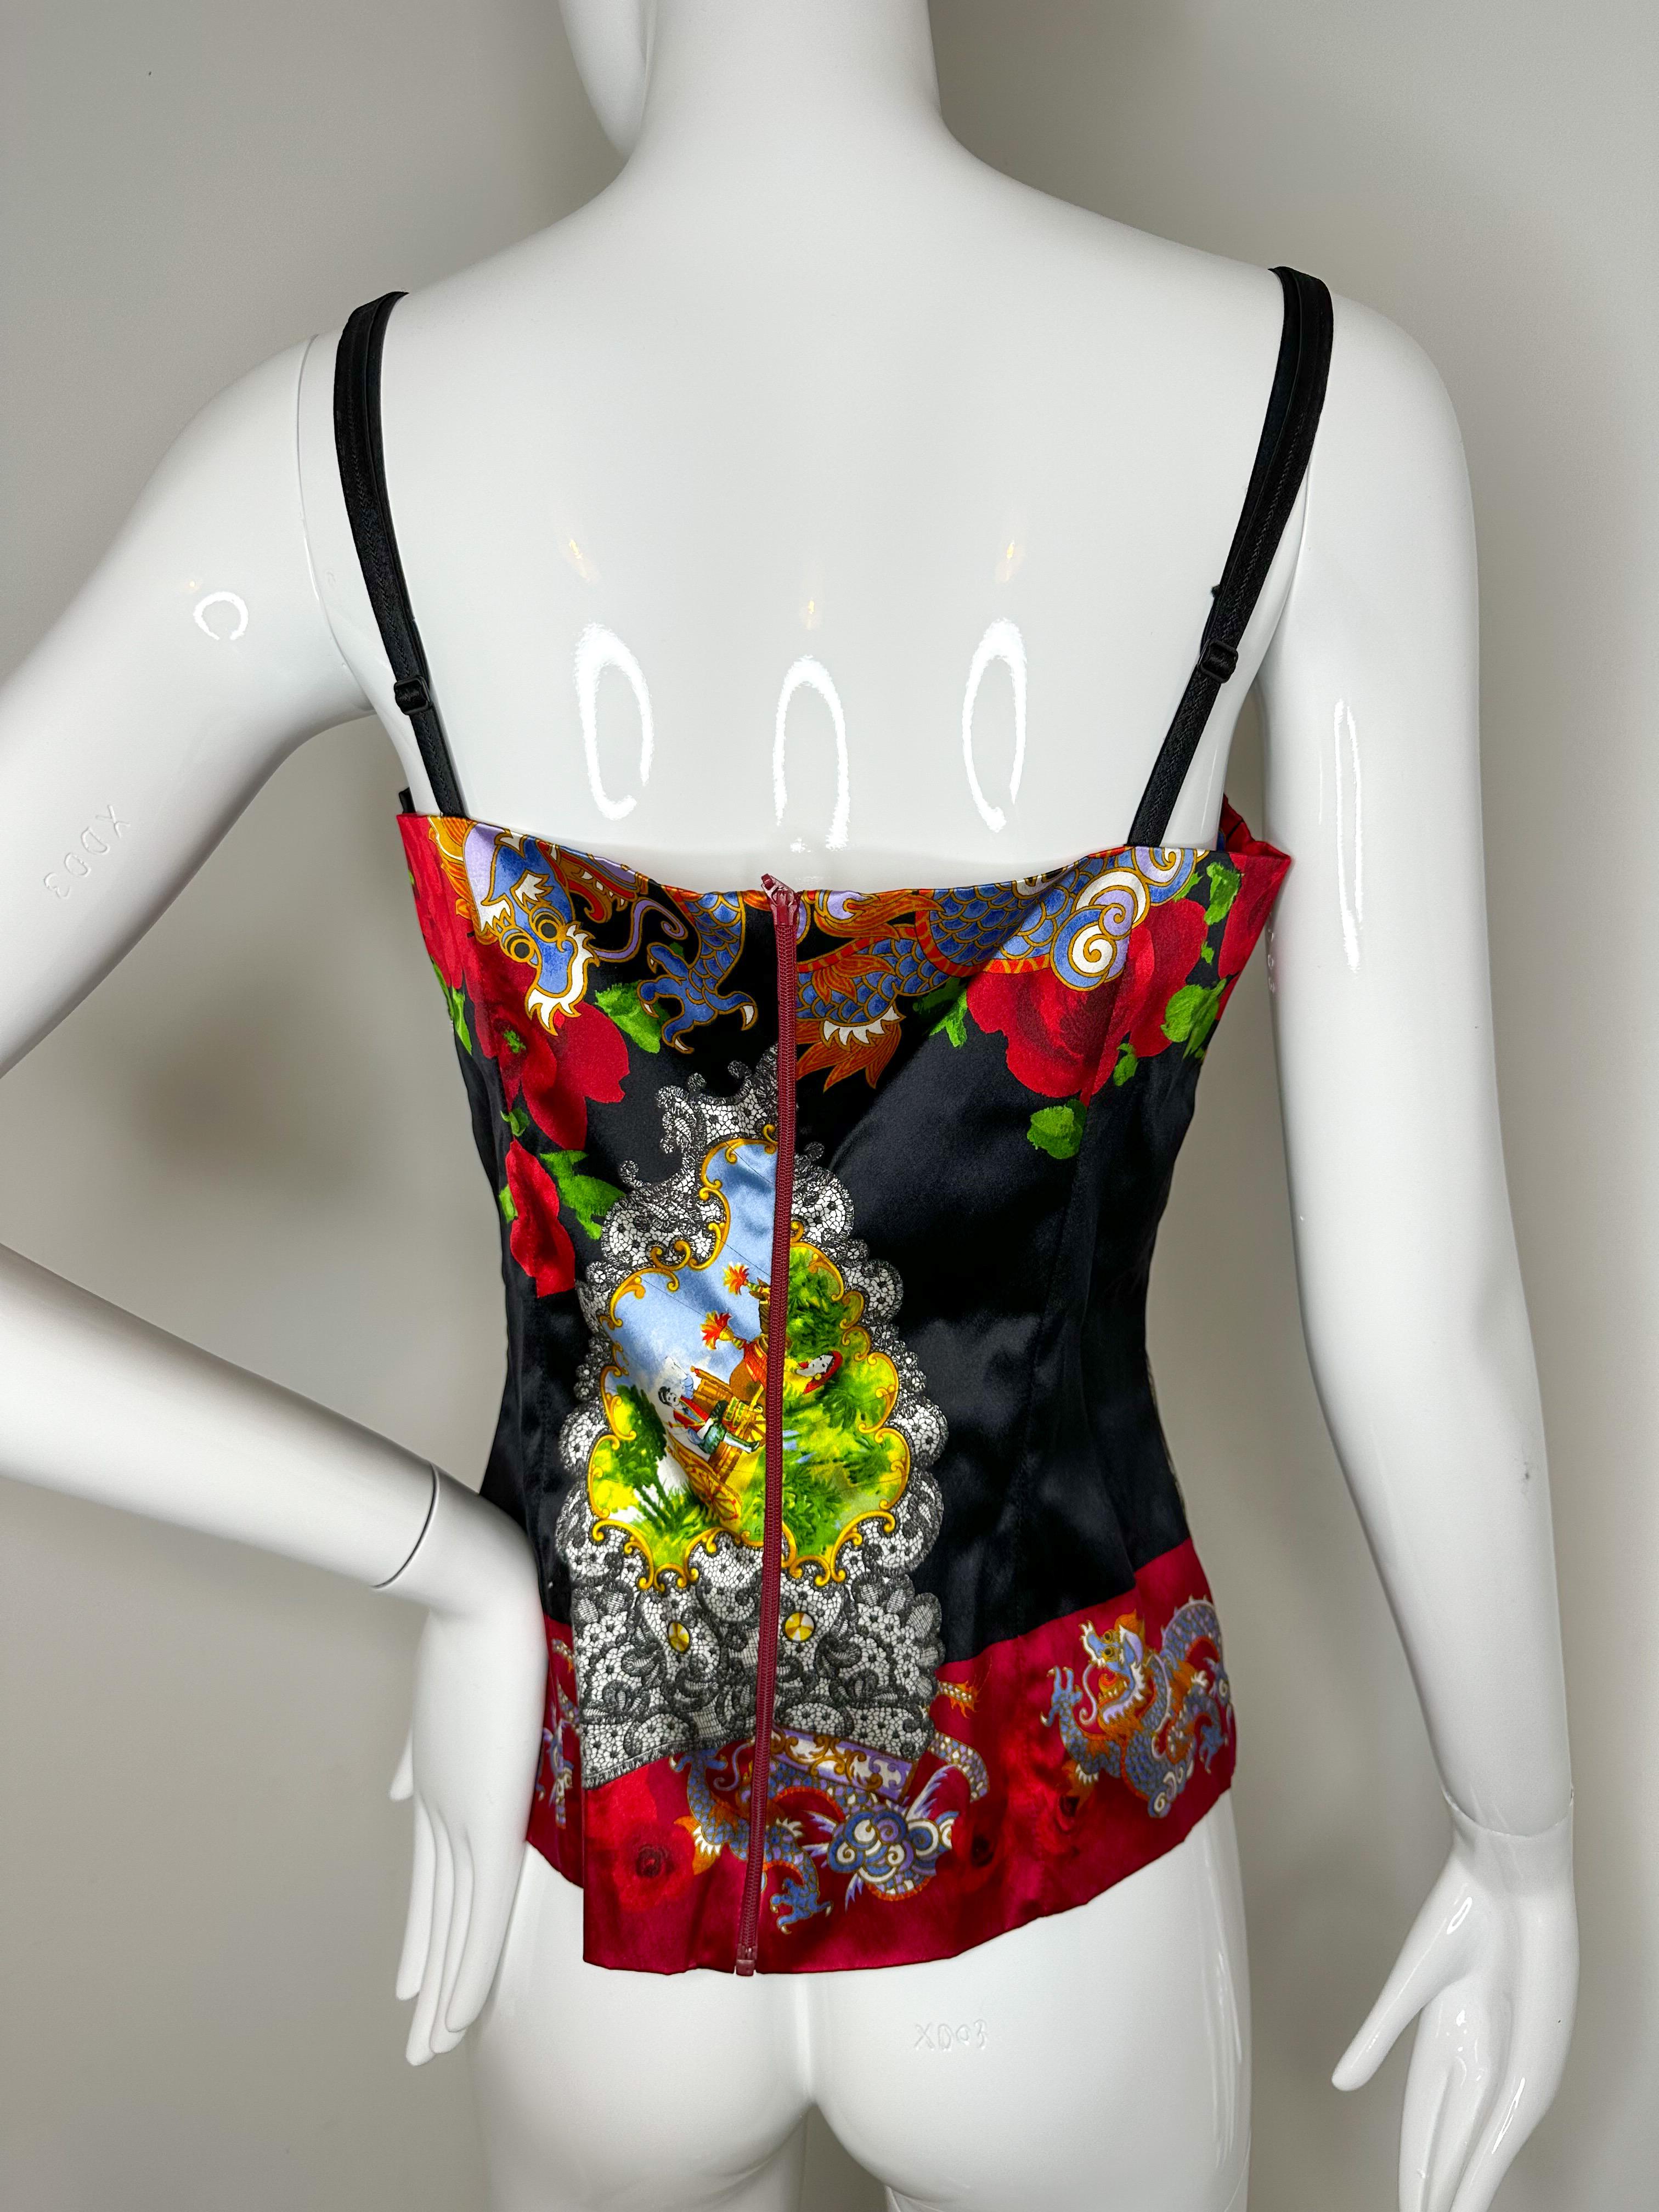 Dolce Gabbana fall 1998 dragon silk Chinese theme bustier top

Size 46

Zipper in the back 
Please see measurements in the photos. They are APPROXIMATE!

There is some stretch to material